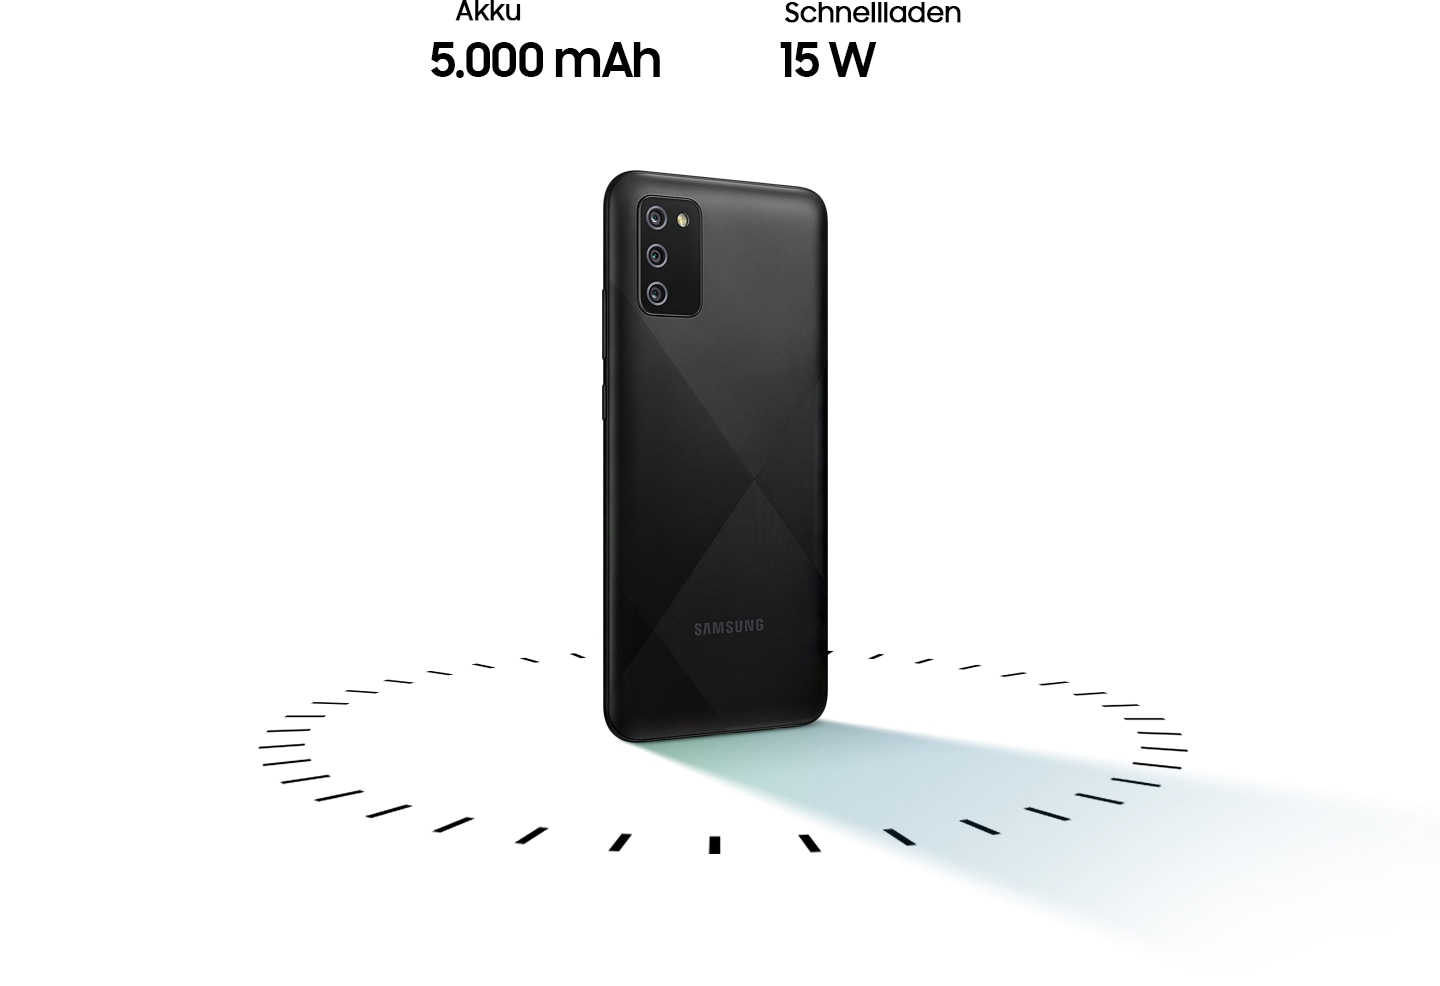 Galaxy A02s stands up, surrounded by circular dots, with the text of 5,000mAh Battery and 15W Adaptive Fast charging.